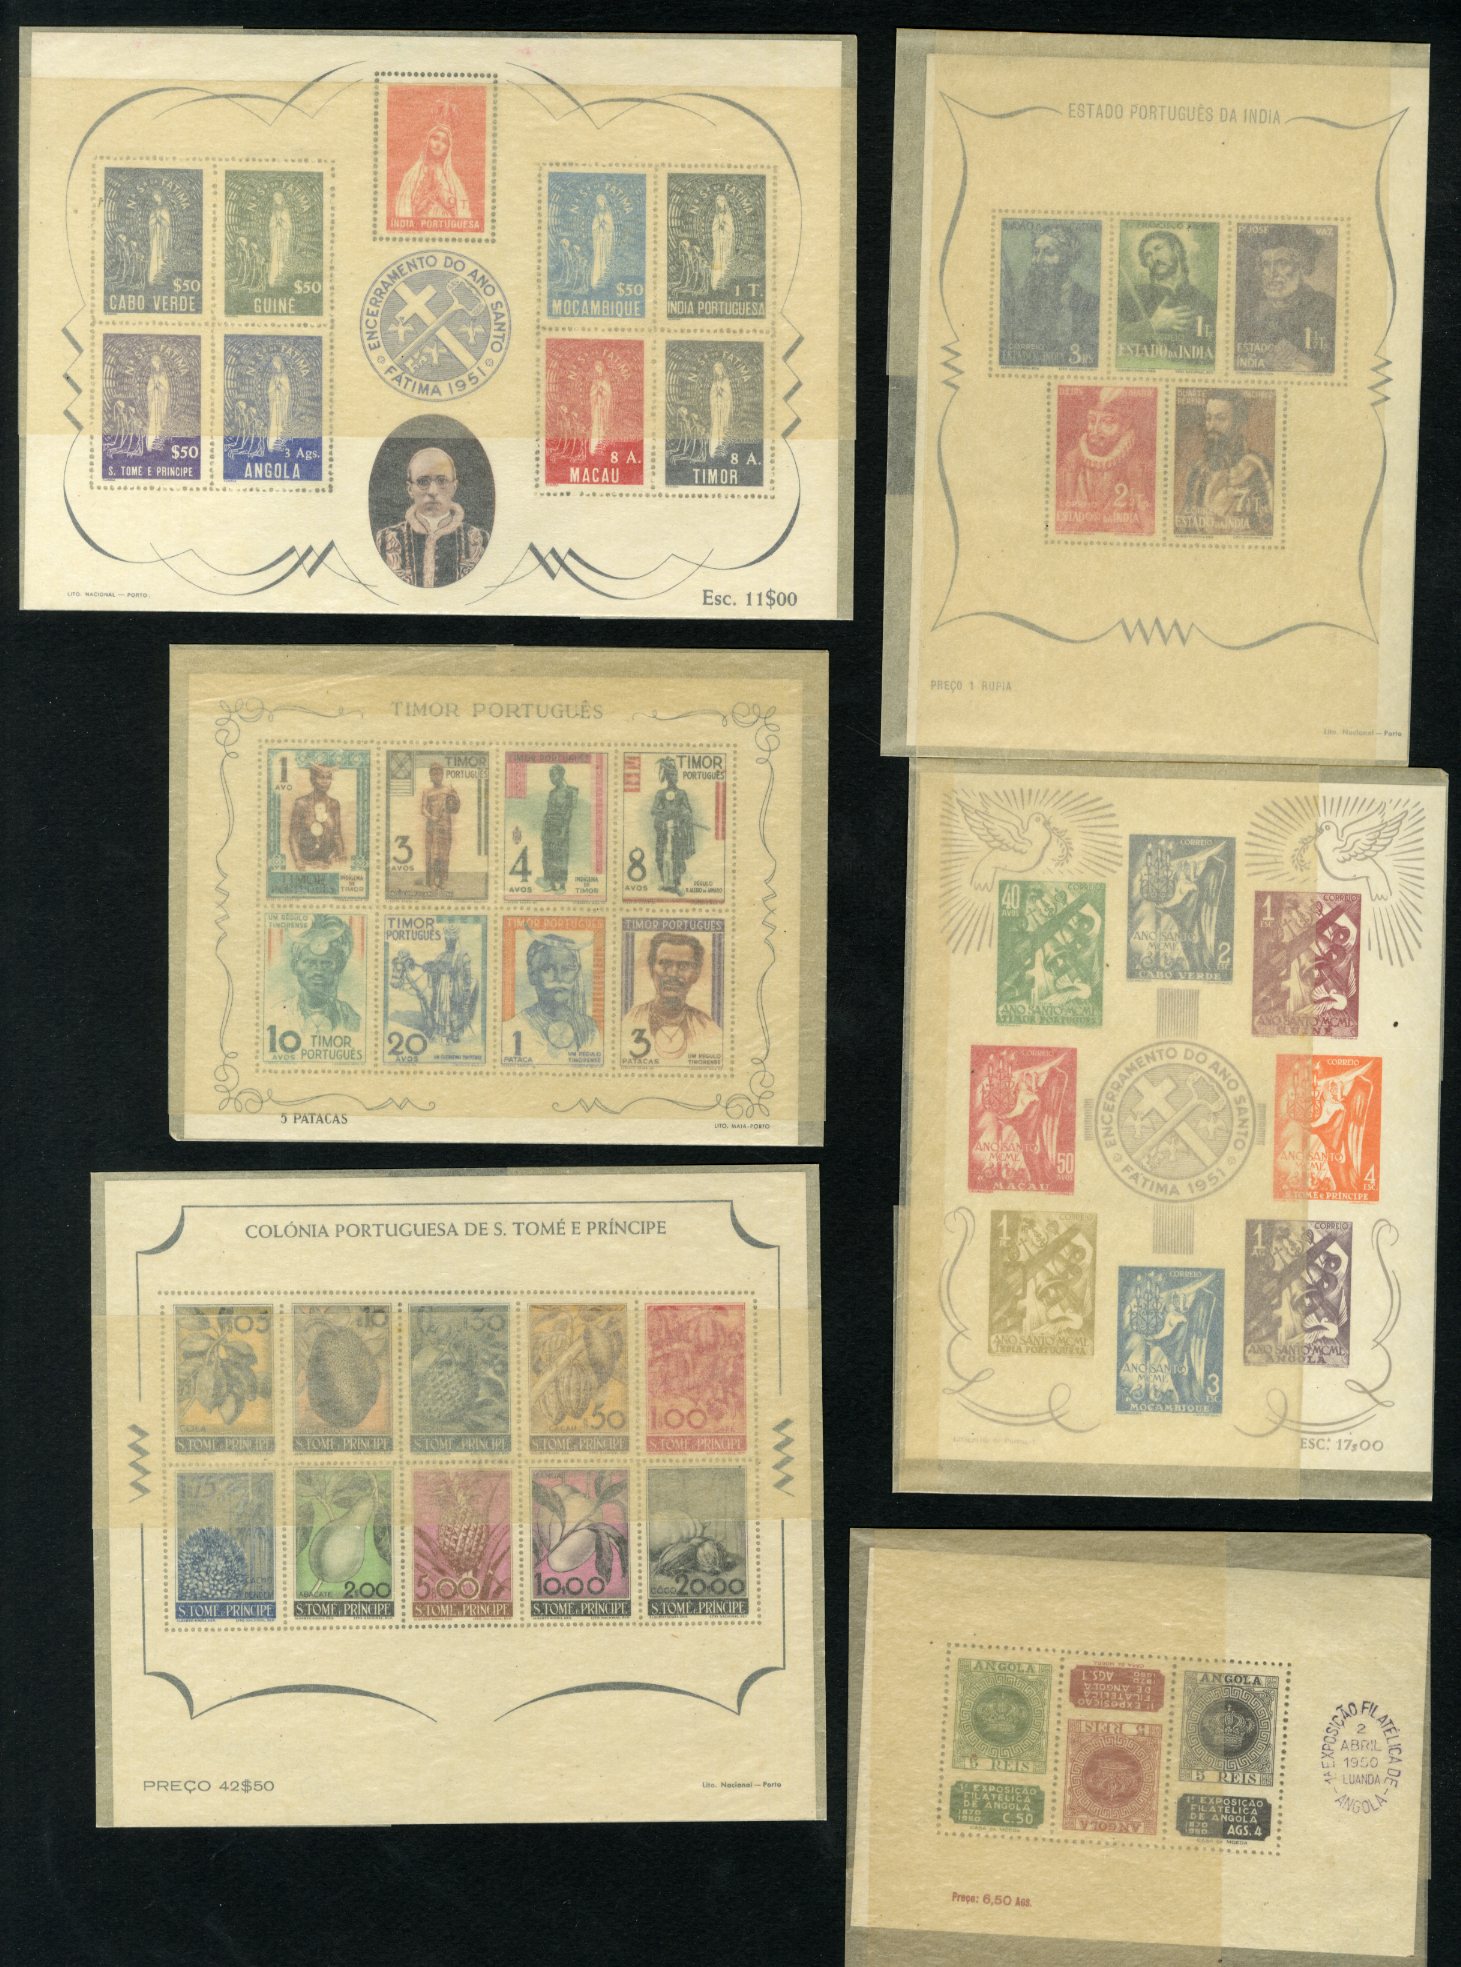 Lot 1513 - LARGE LOTS AND COLLECTIONS UNITED STATES  -  Cherrystone Auctions Rare Stamps & Postal History of the World